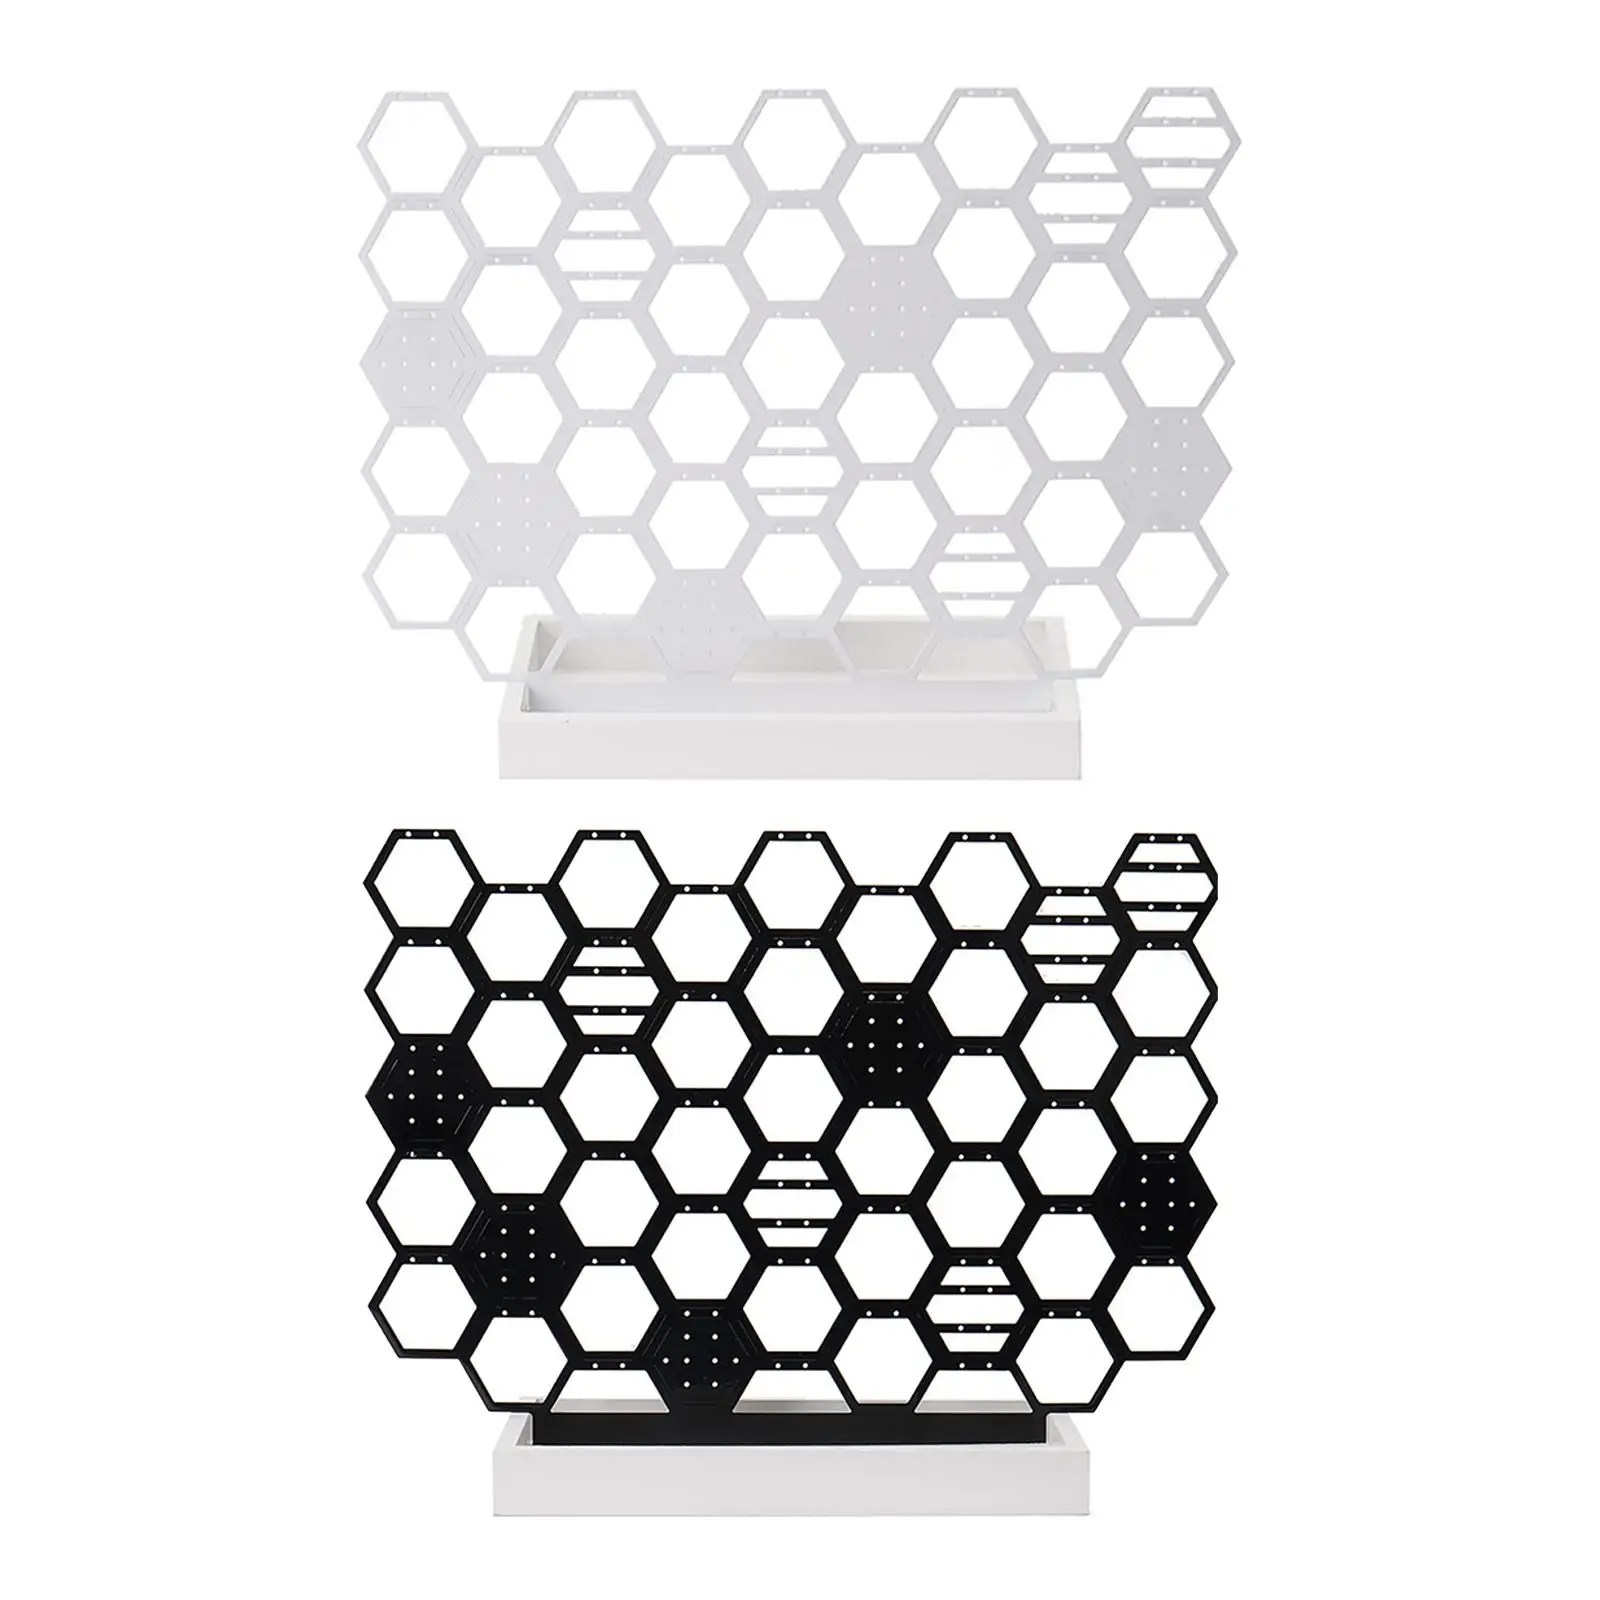 Earring Display Stand Honeycomb Shaped Metal Large Storage Holder for Showcase